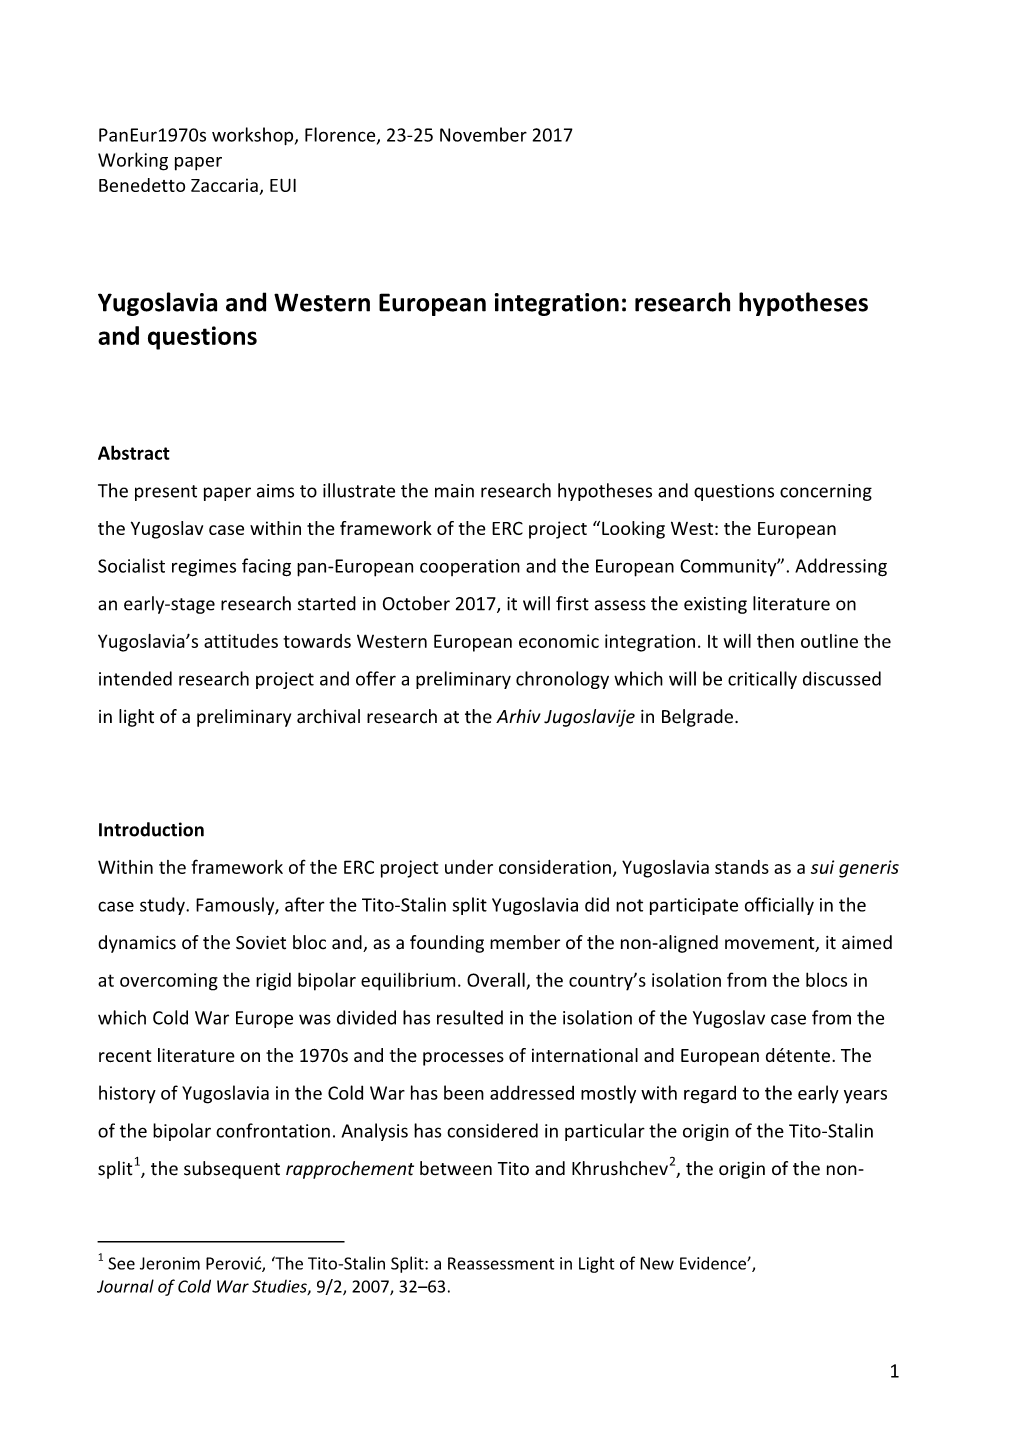 Yugoslavia and Western European Integration: Research Hypotheses and Questions